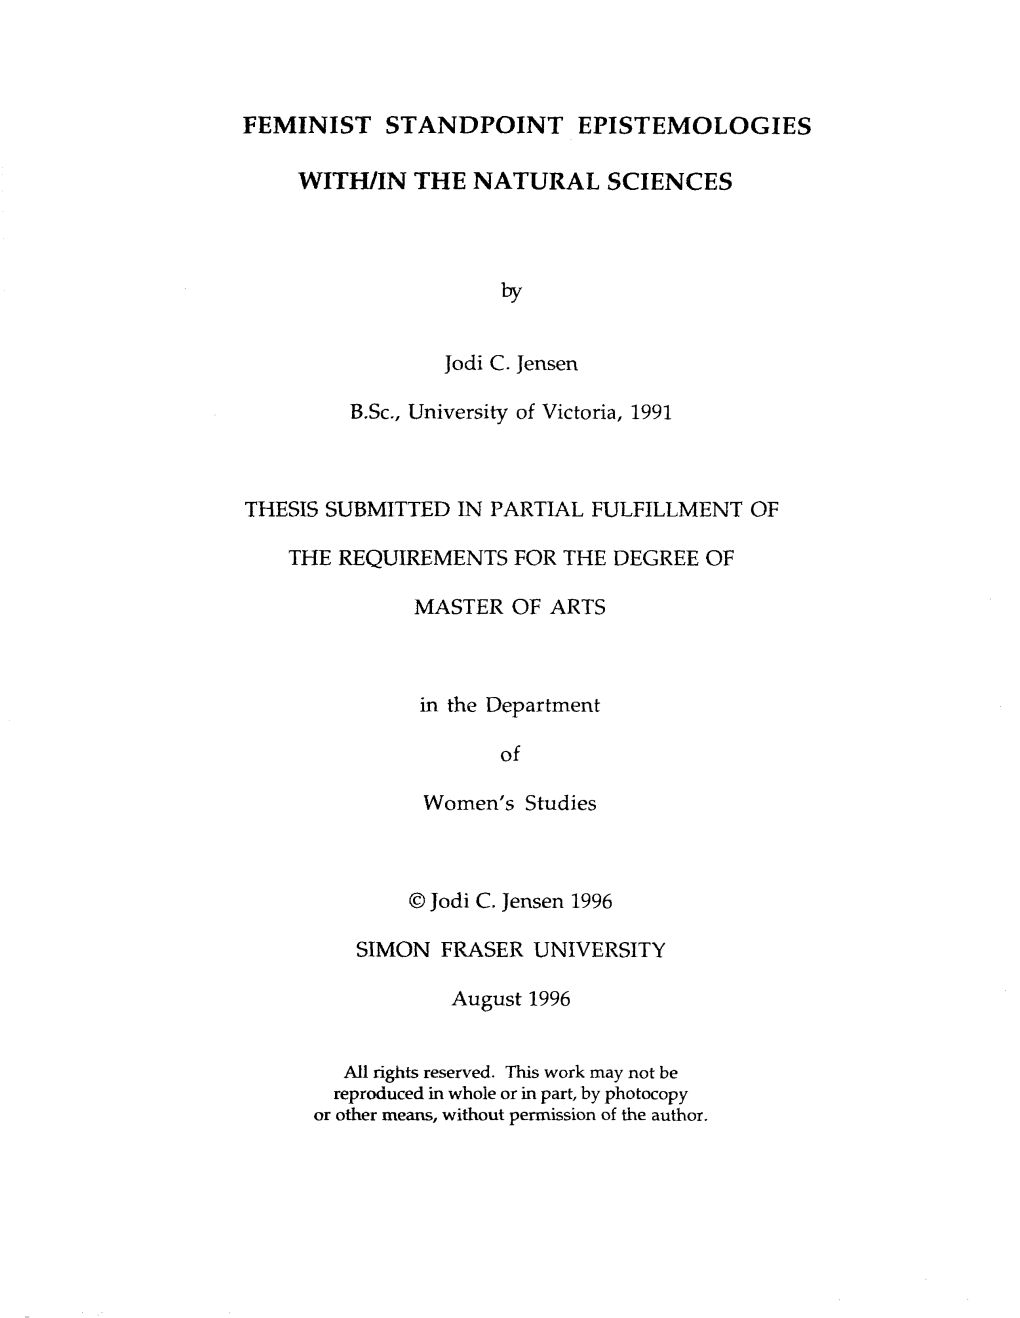 Feminist Standpoint Epistemologies With/In the Natural Sciences